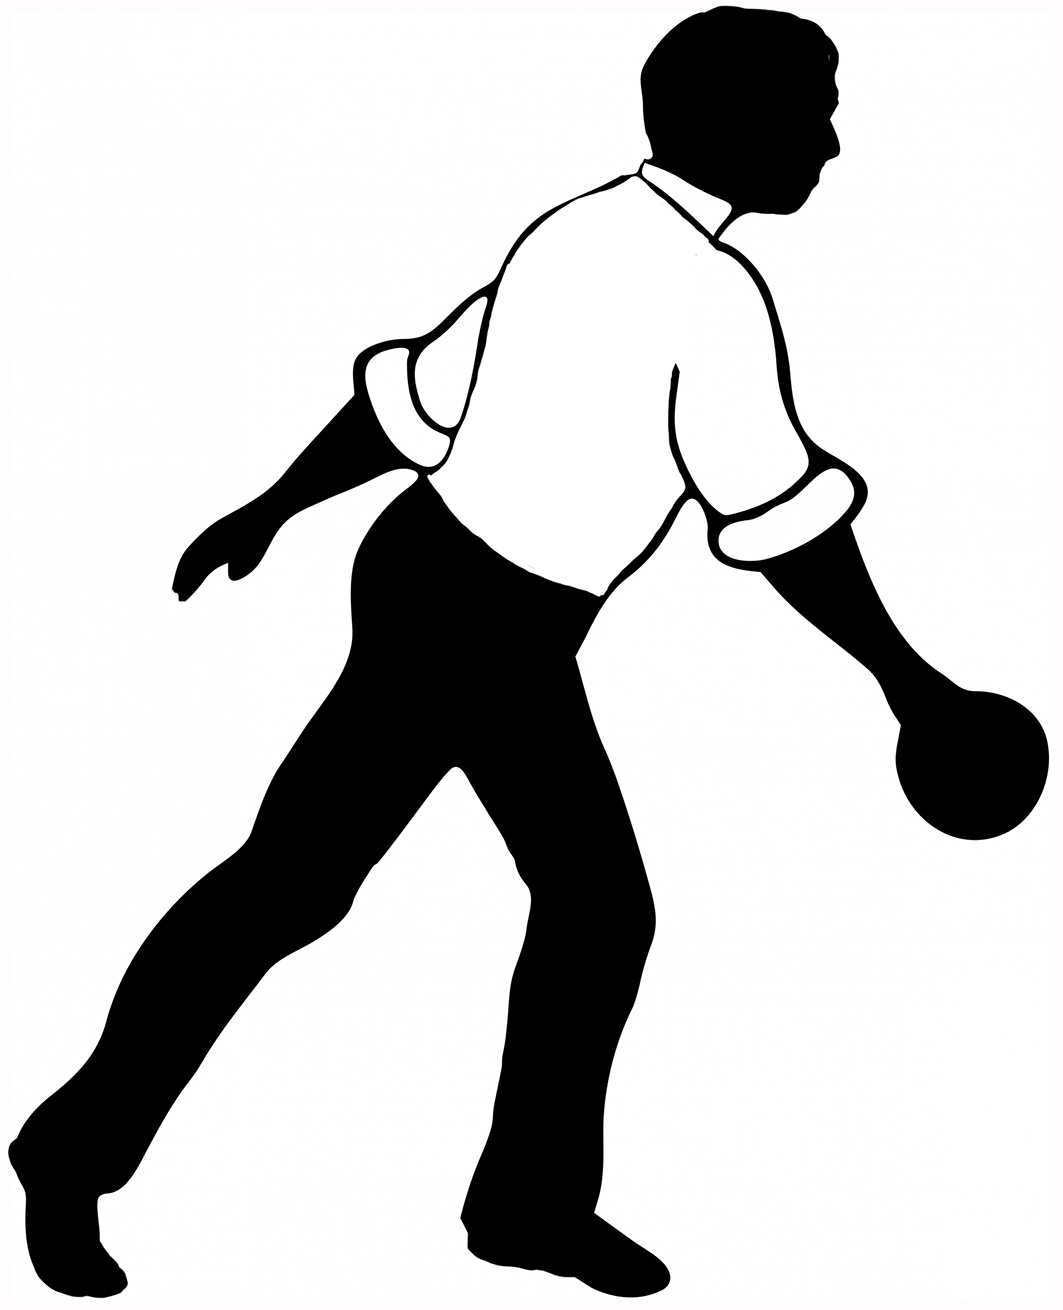 Person bowling clipart.